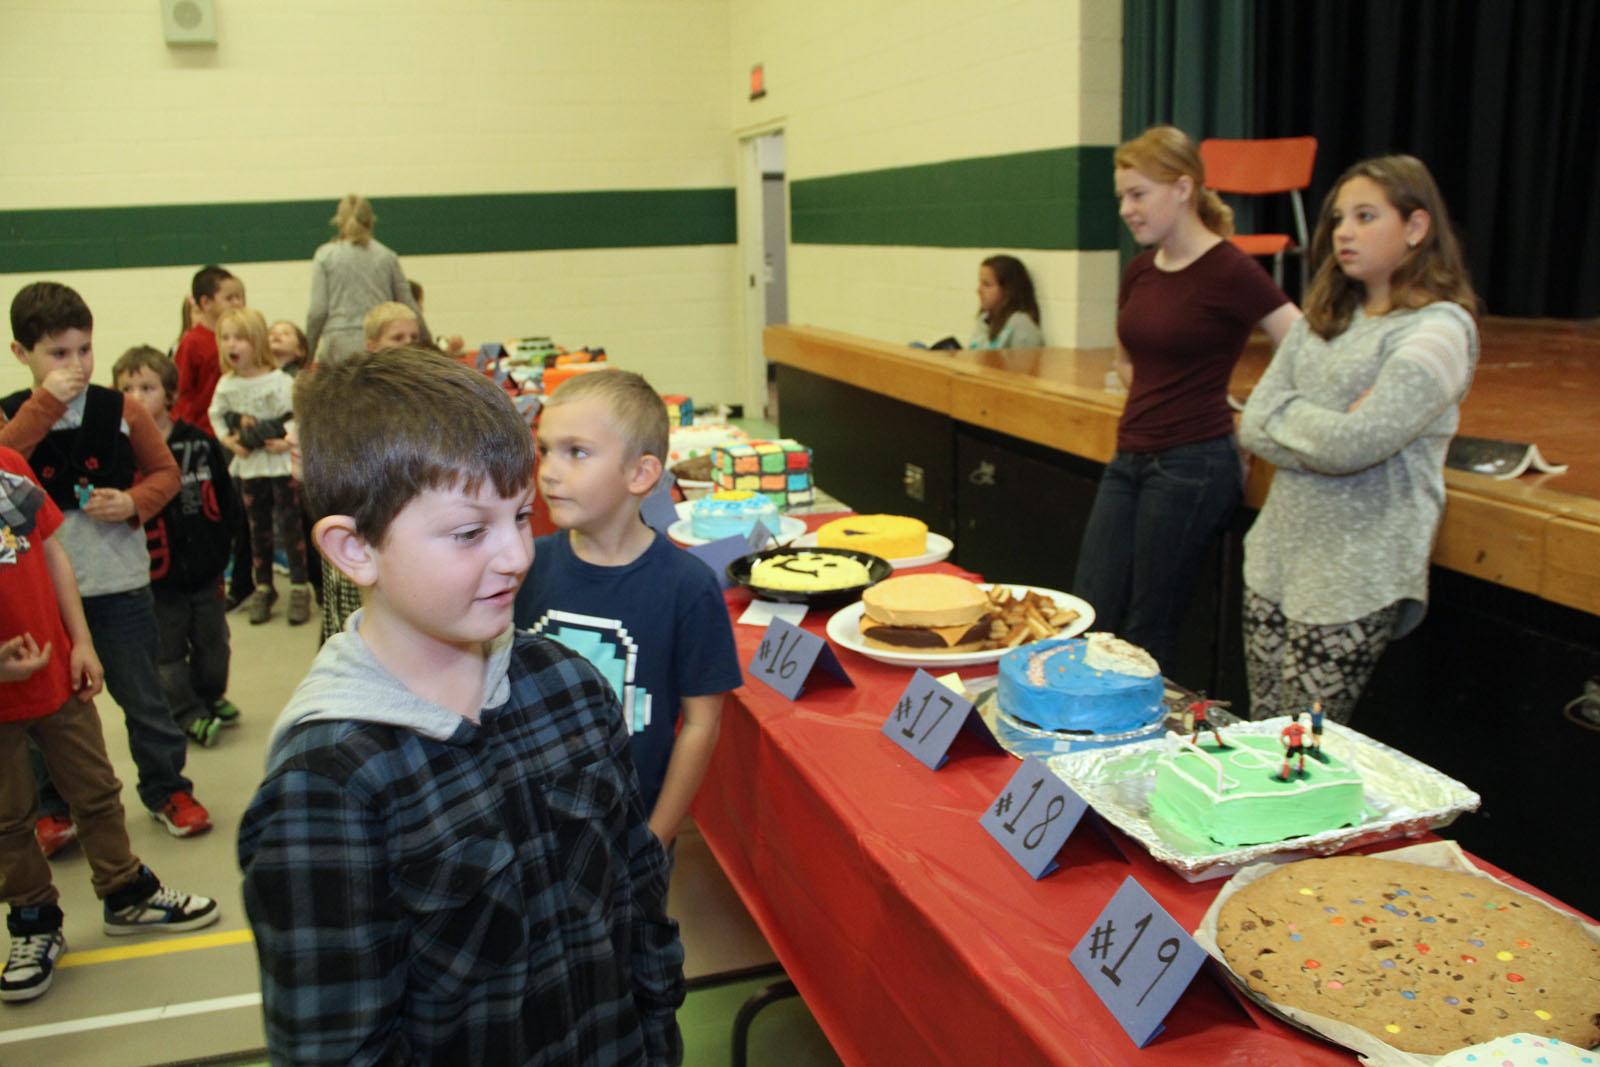 PCPS hosts cake auction to raise money for sports programs